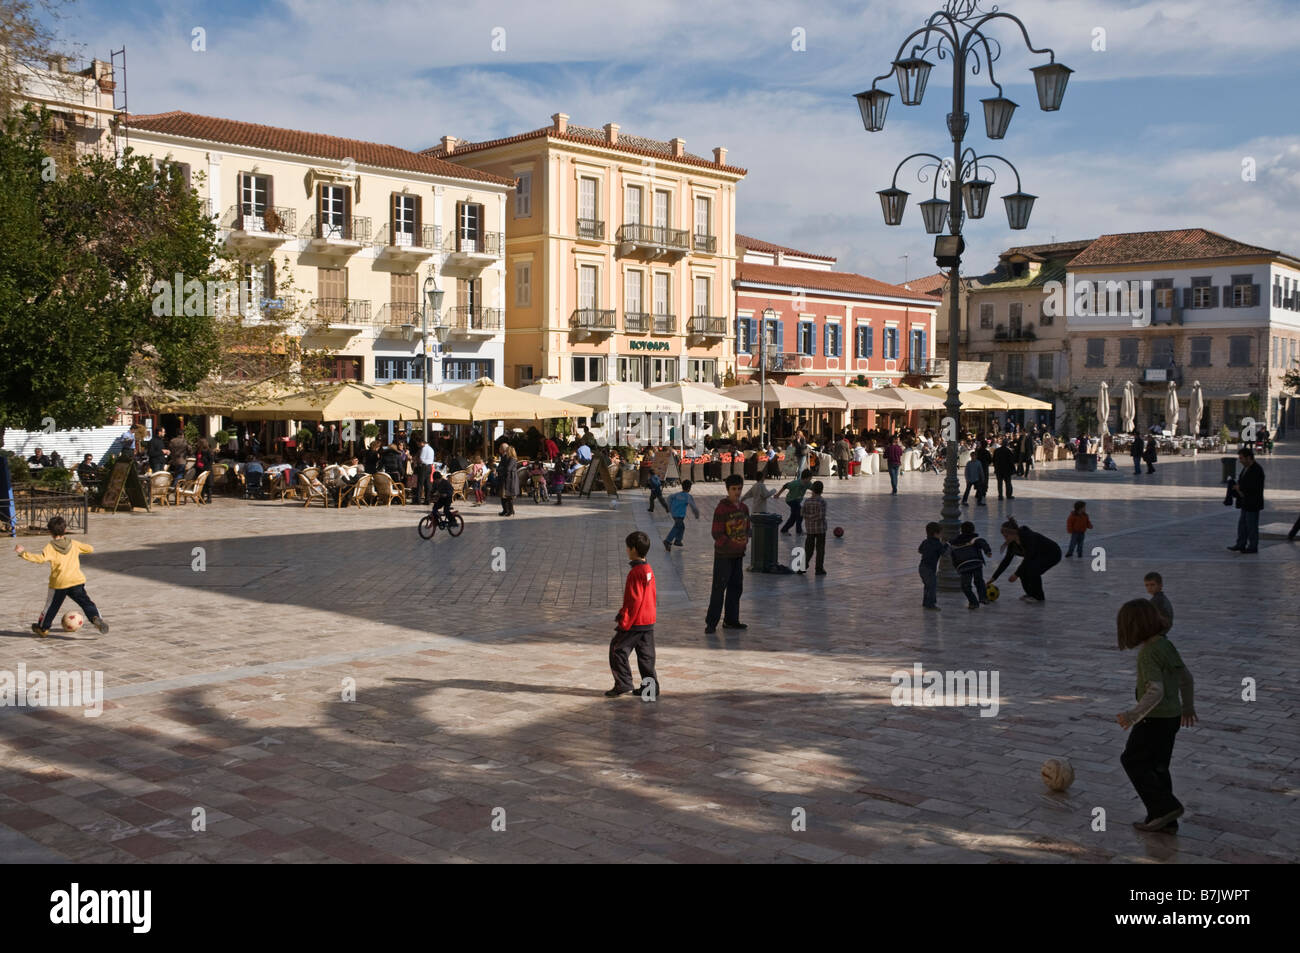 Sunday in the Platia Syndagmatos the main square in the old town of Nafplio, argolid, Peloponnese, Greece Stock Photo